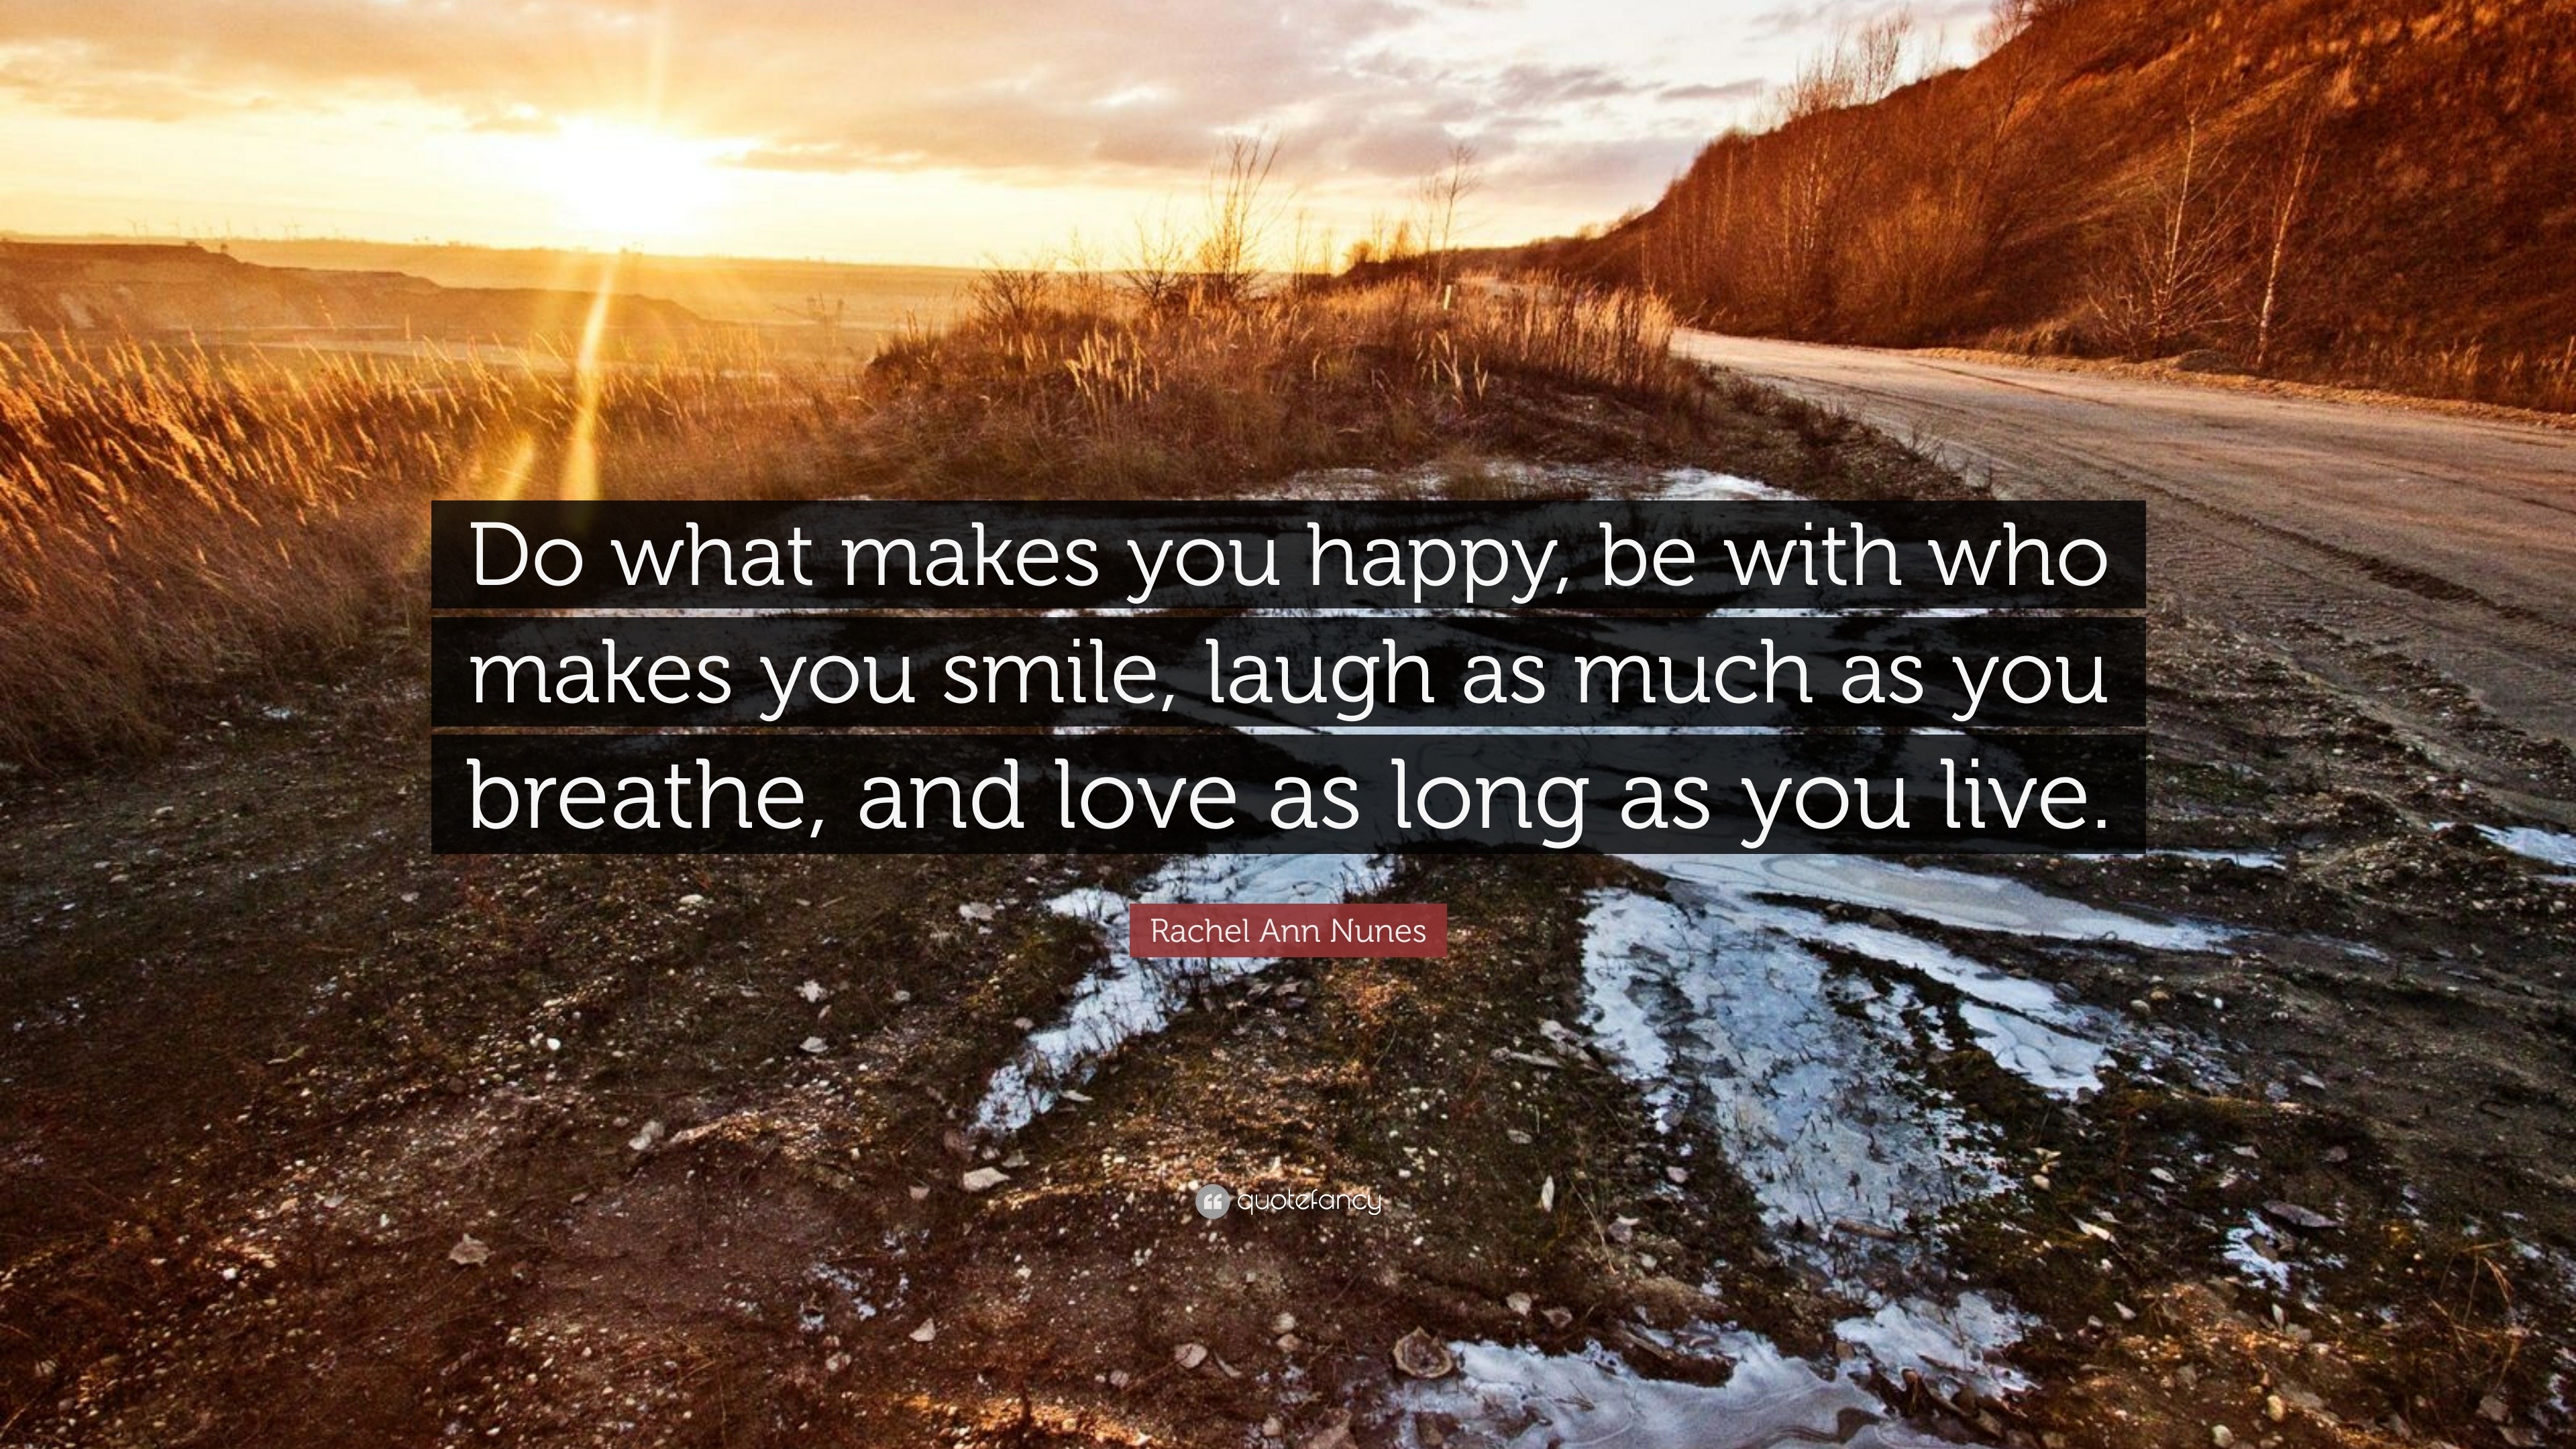 Rachel Ann Nunes Quote “Do what makes you happy be with who makes